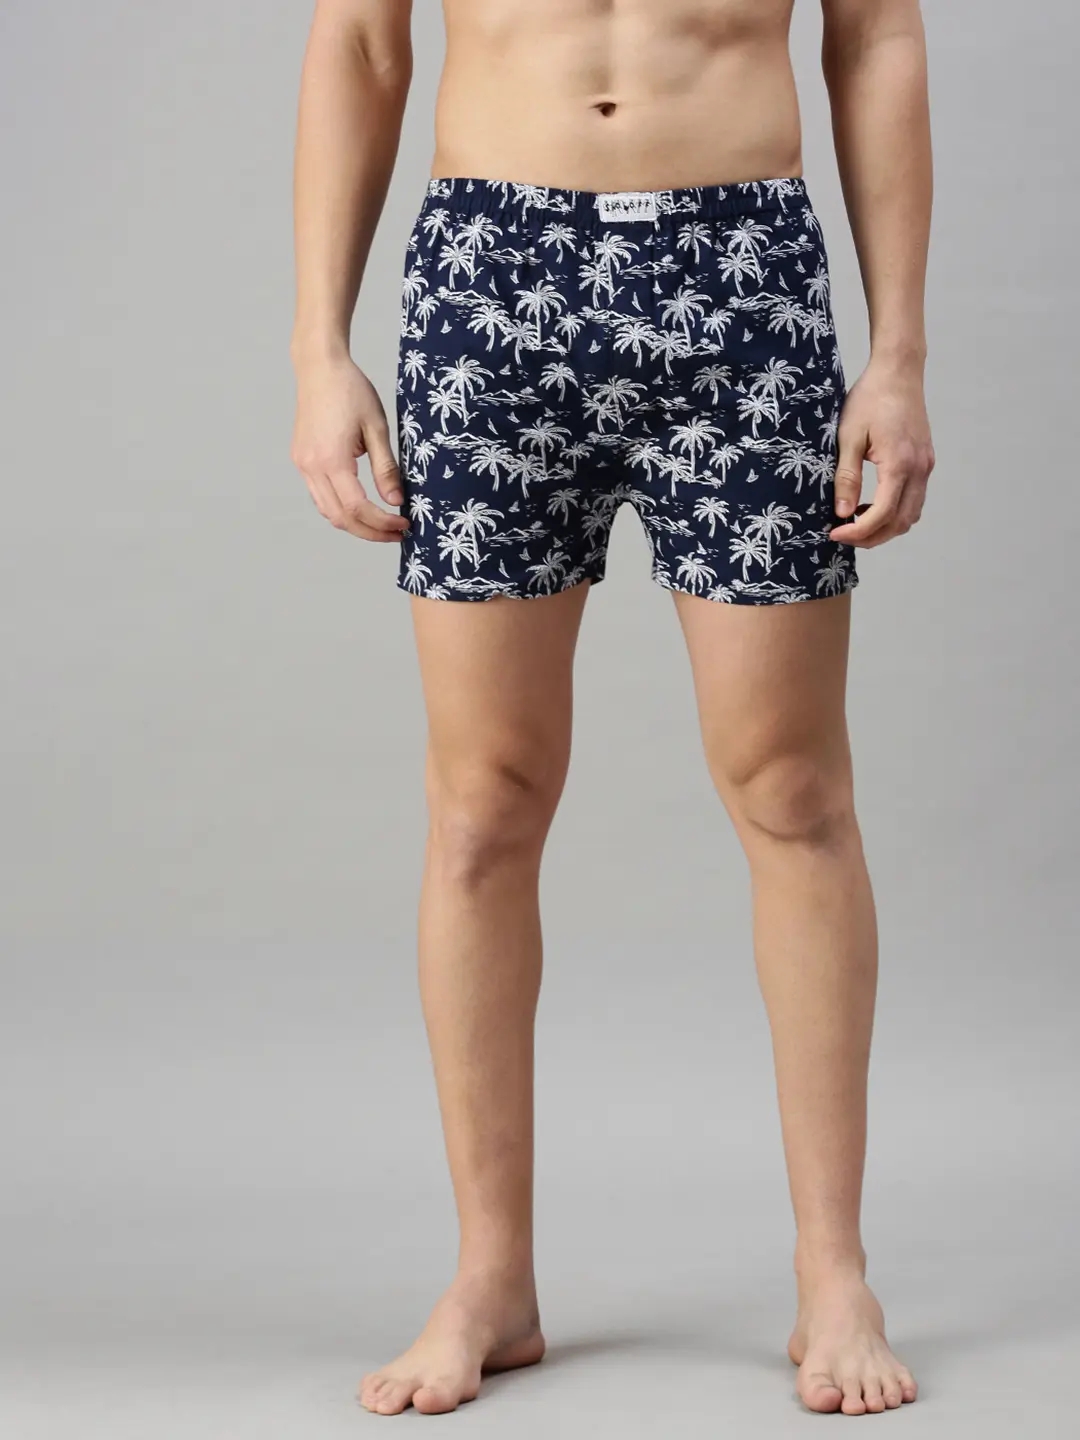 Pack of 2 Men's Casual Printed Cotton Boxers